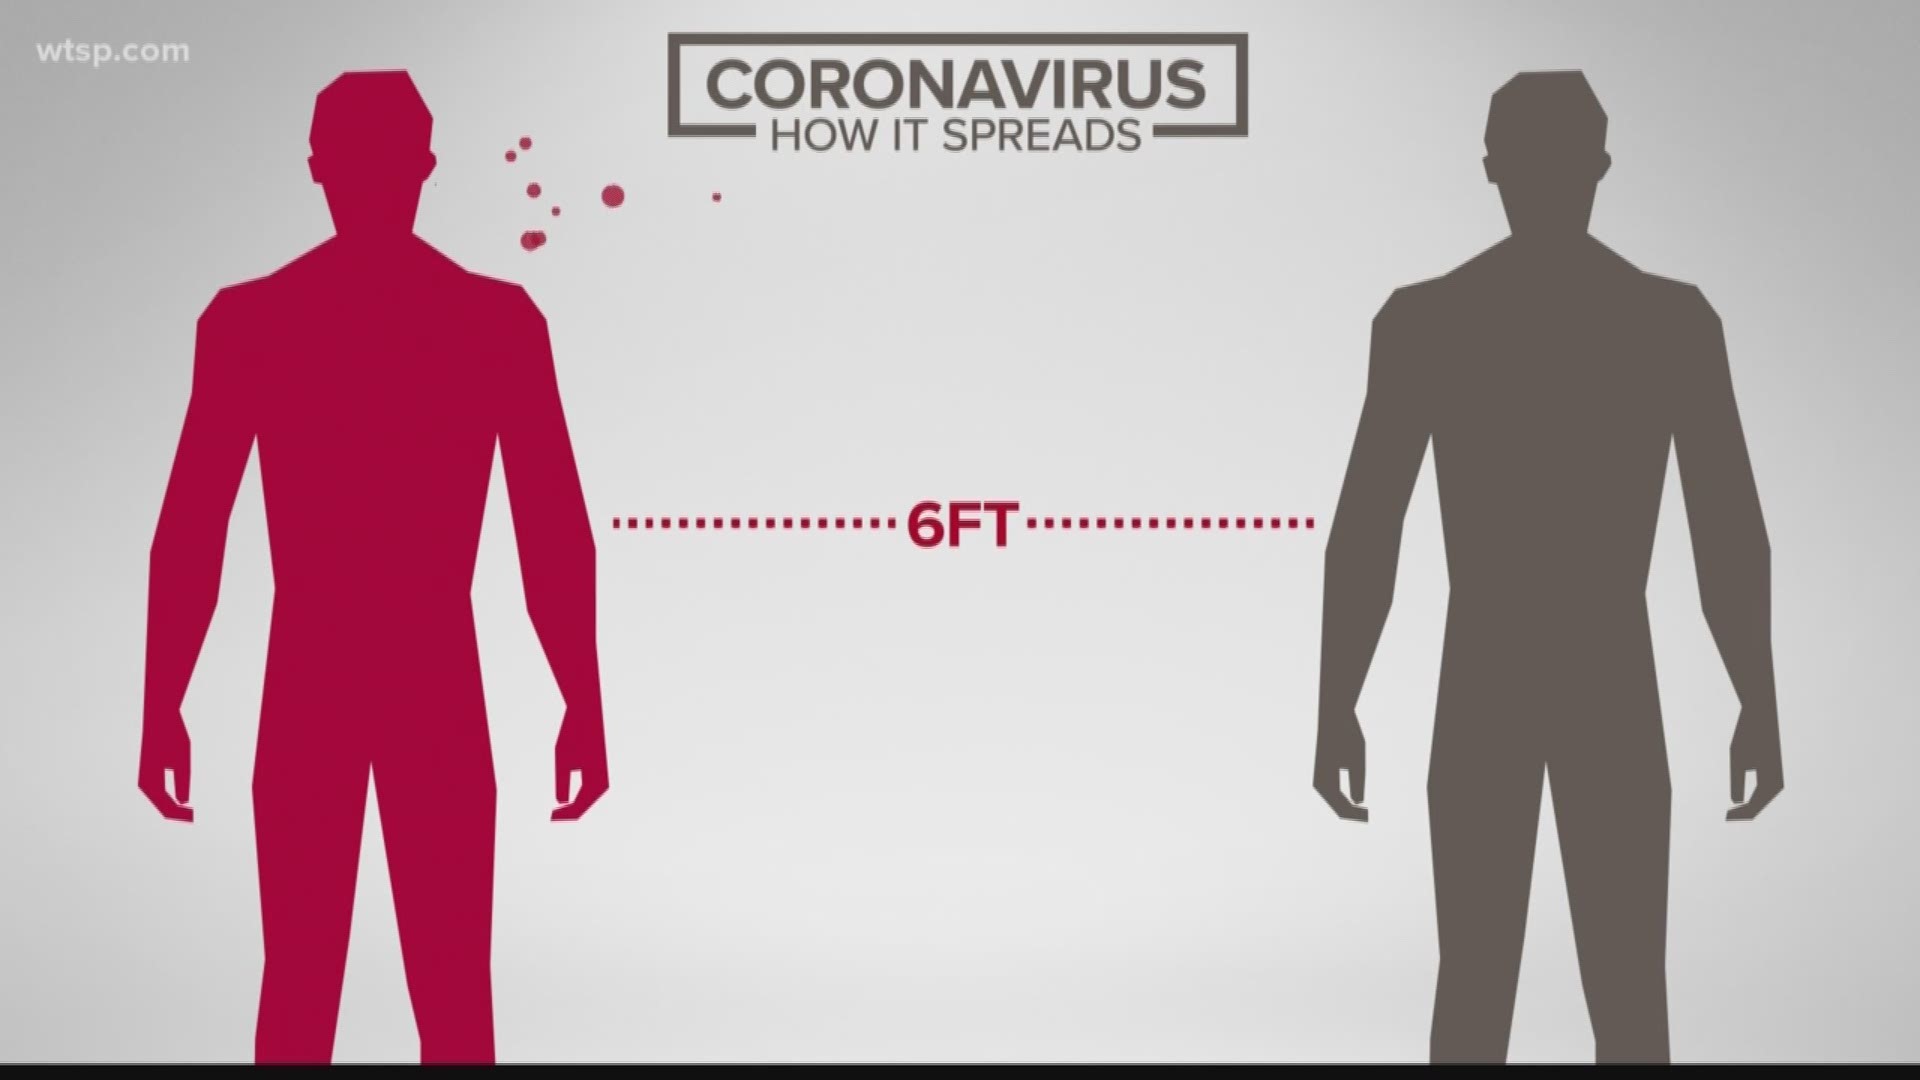 We take a closer look at how coronavirus is spread.